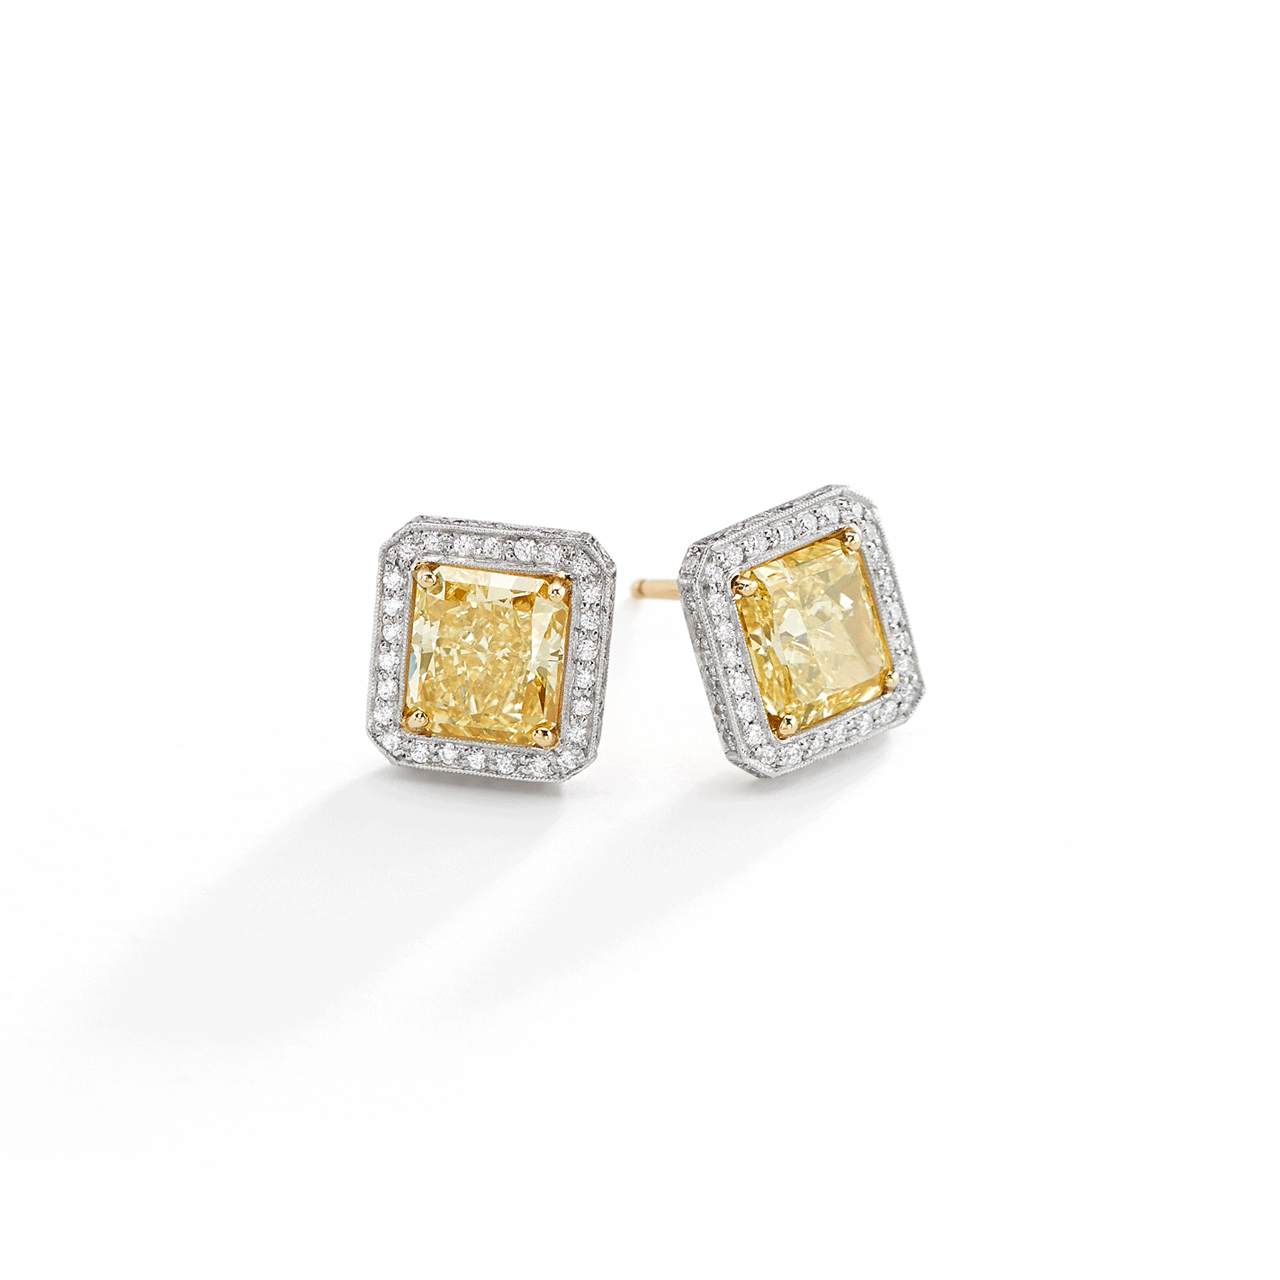 Private Reserve Platinum and 18K Gold Fancy Yellow Diamond Earrings